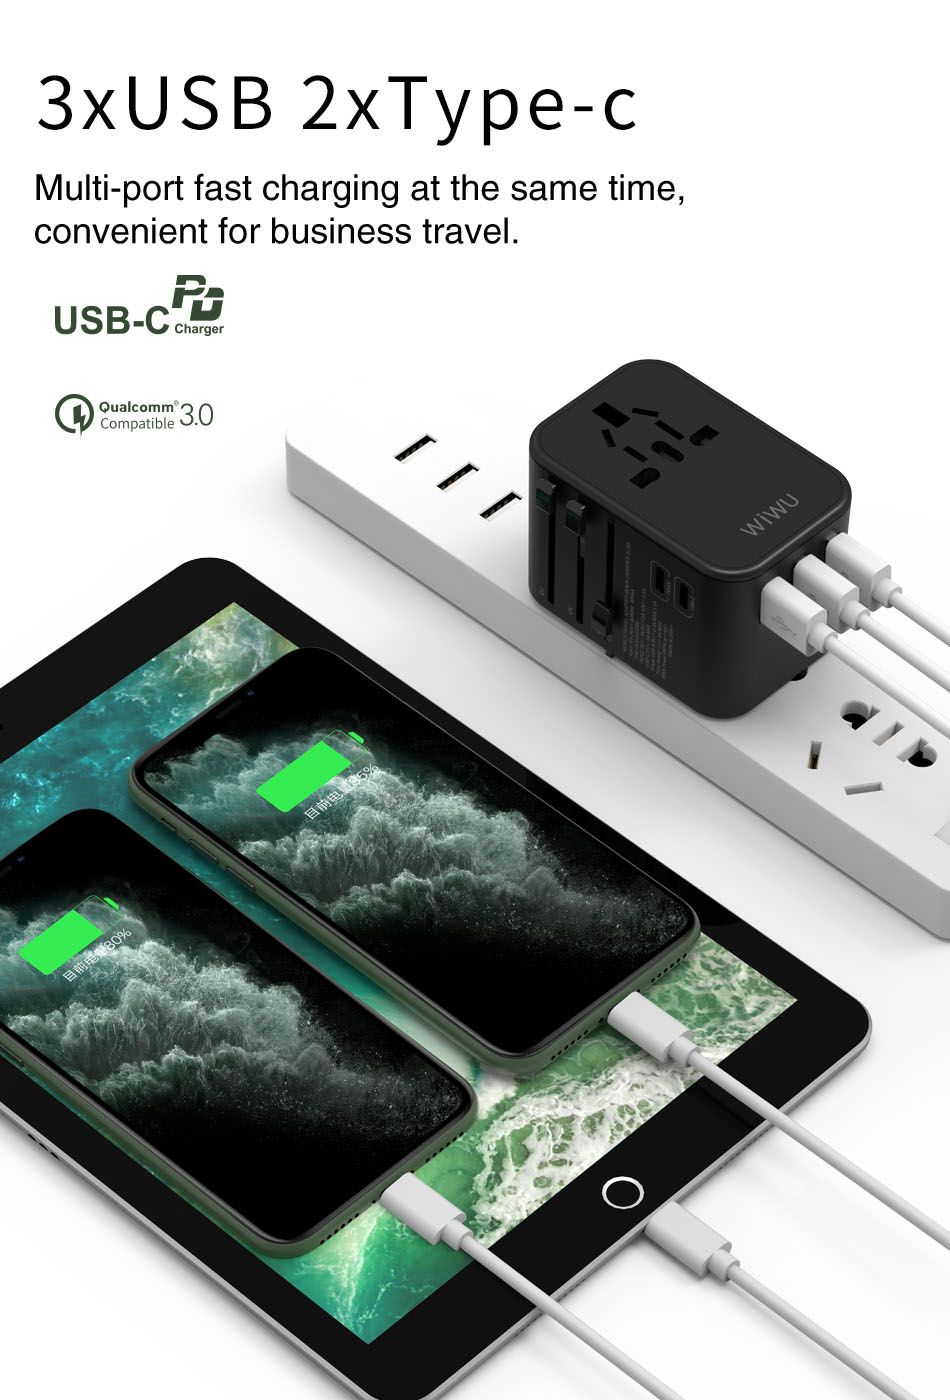 WIWU-UA-303-Charger-Adapter-Travel-Charger-with-Contractive-Plug-3-USB-Ports-2-Type-C-PD-Port-1685600